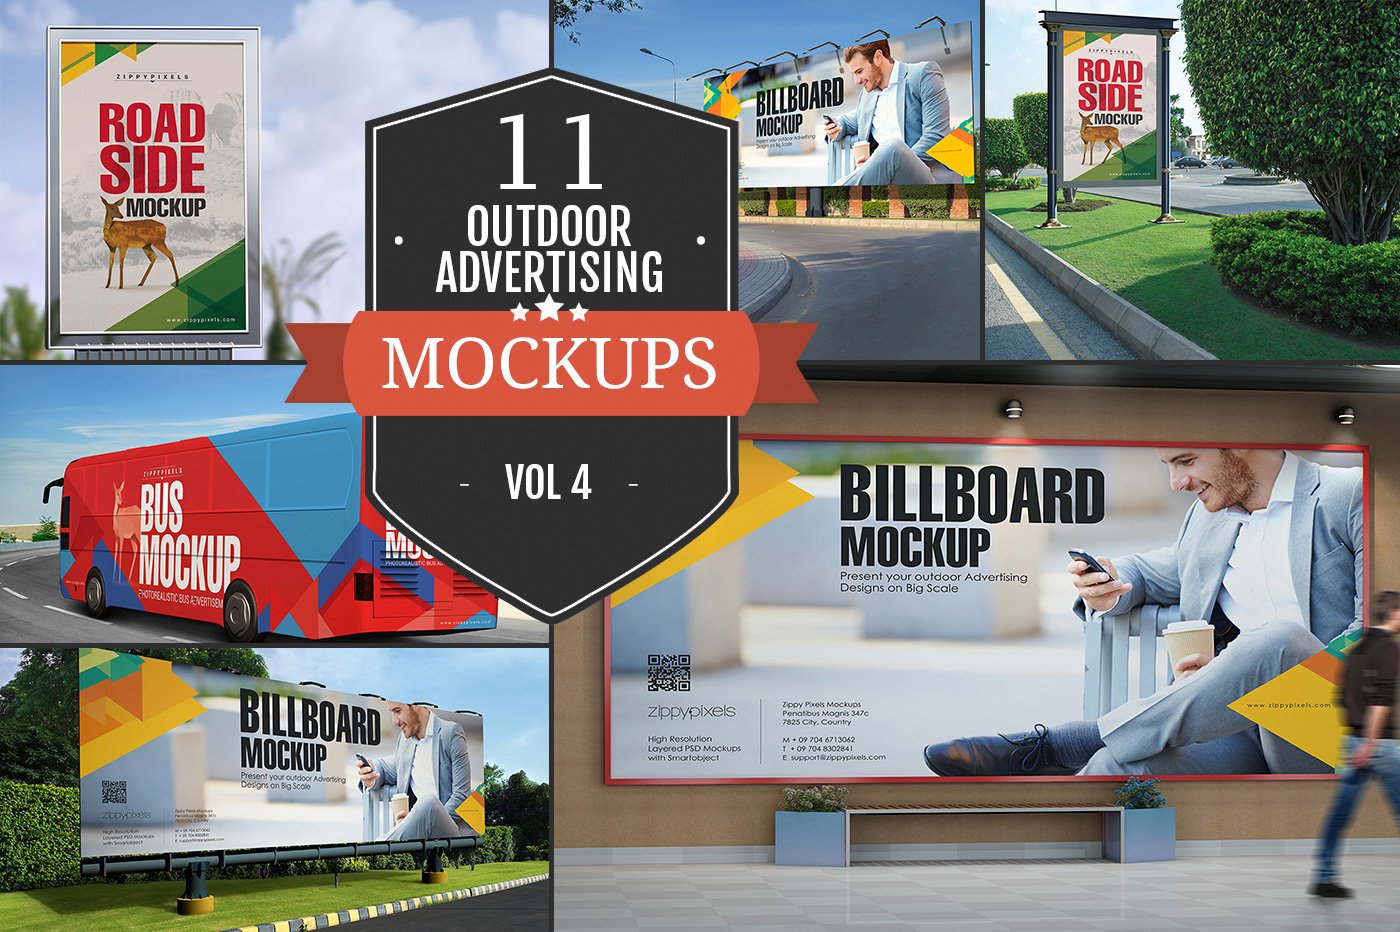 Outdoor Advertising Mockups Vol. 4 cover image.